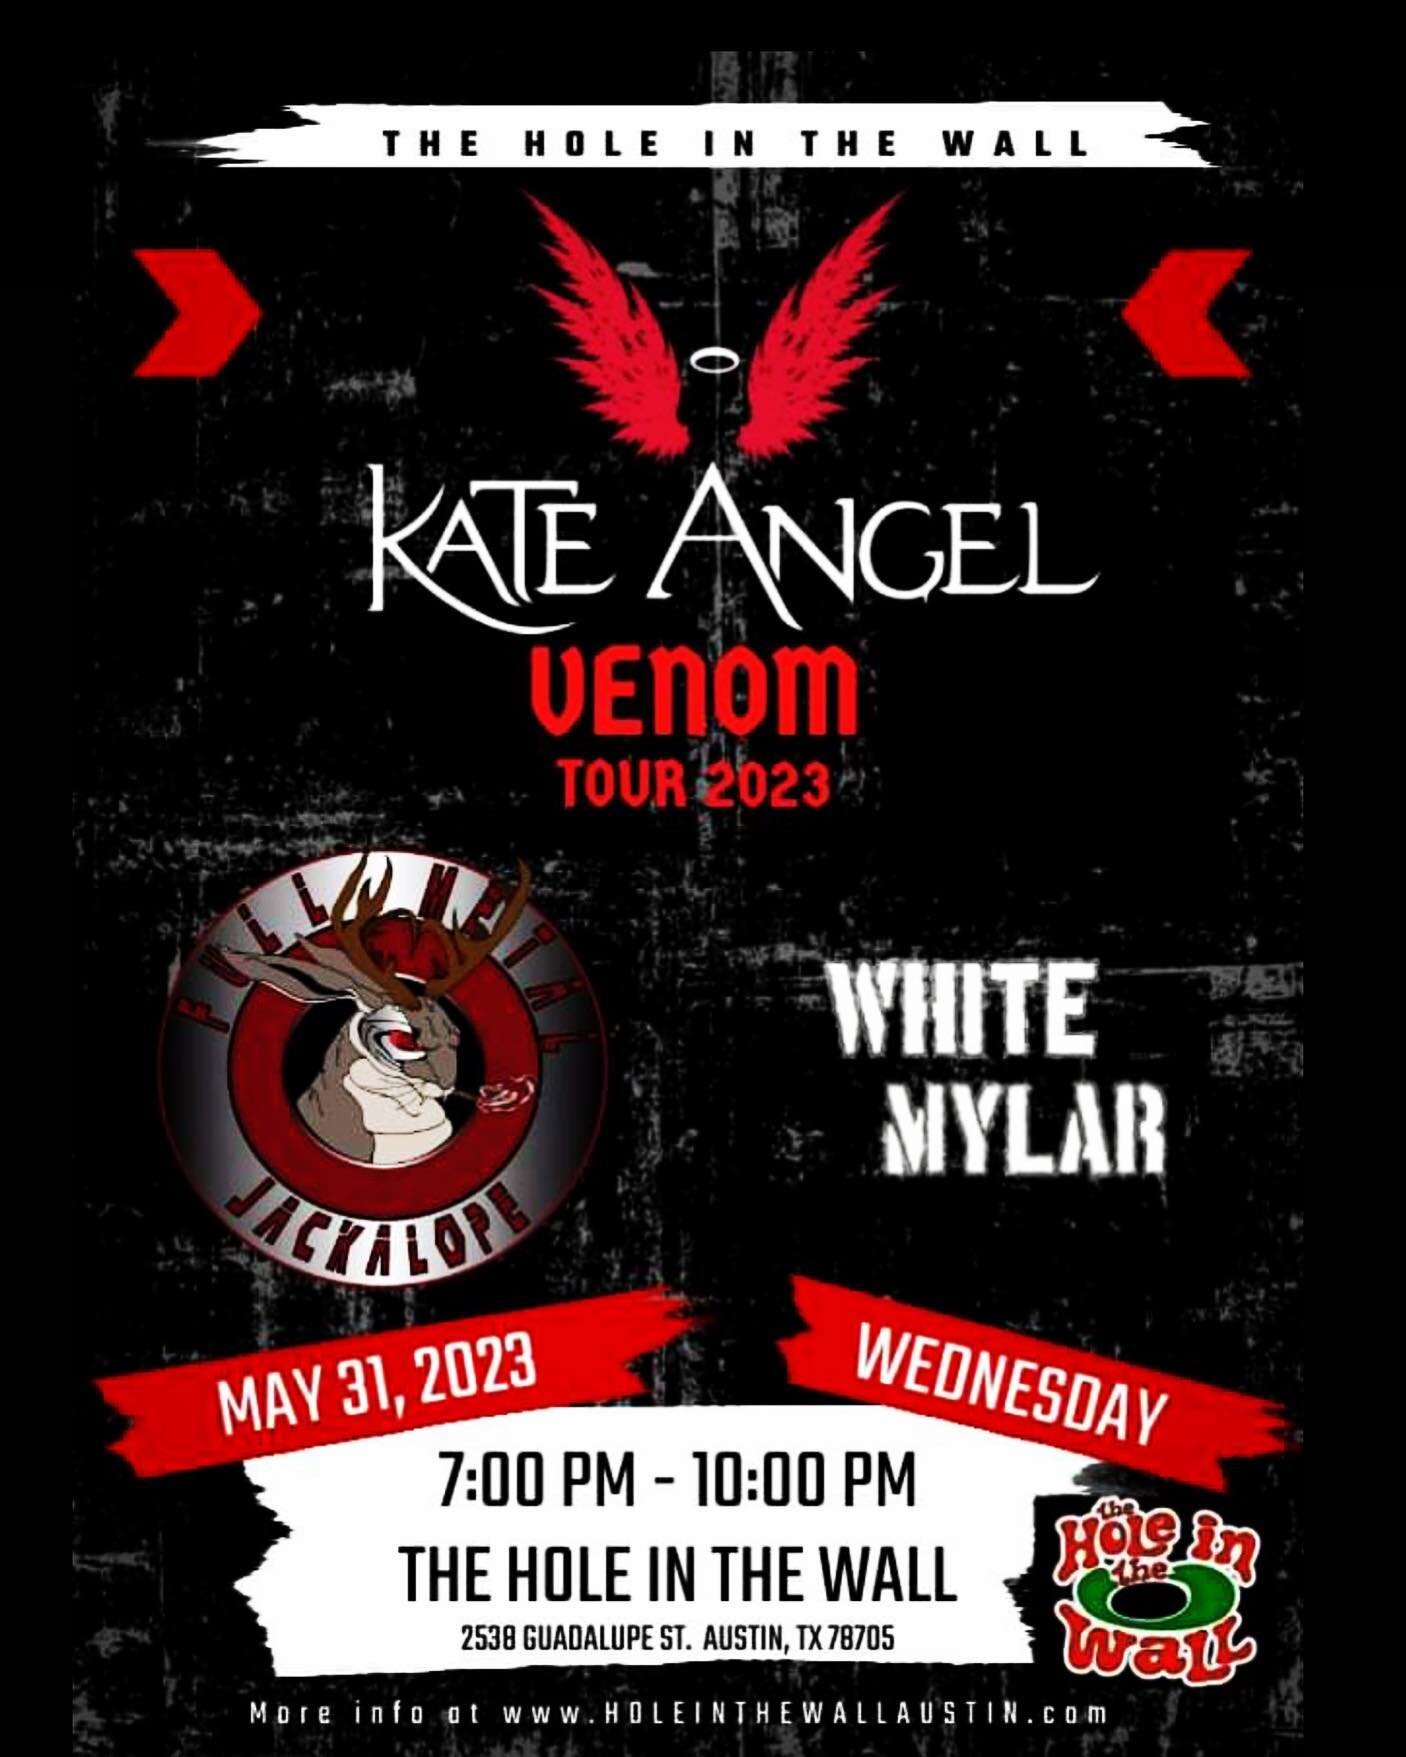 🚨 &quot;VENOM&quot; Tour Announcement 🚨
Kate Angel's &quot;VENOM&quot; Tour 2023 strikes first on May 31, Wednesday at Austin, TX iconic venue, HOLE IN THE WALL @hitwatx with special guests Full Metal Jackalope and White Mylar.  Doors open at 6:00 